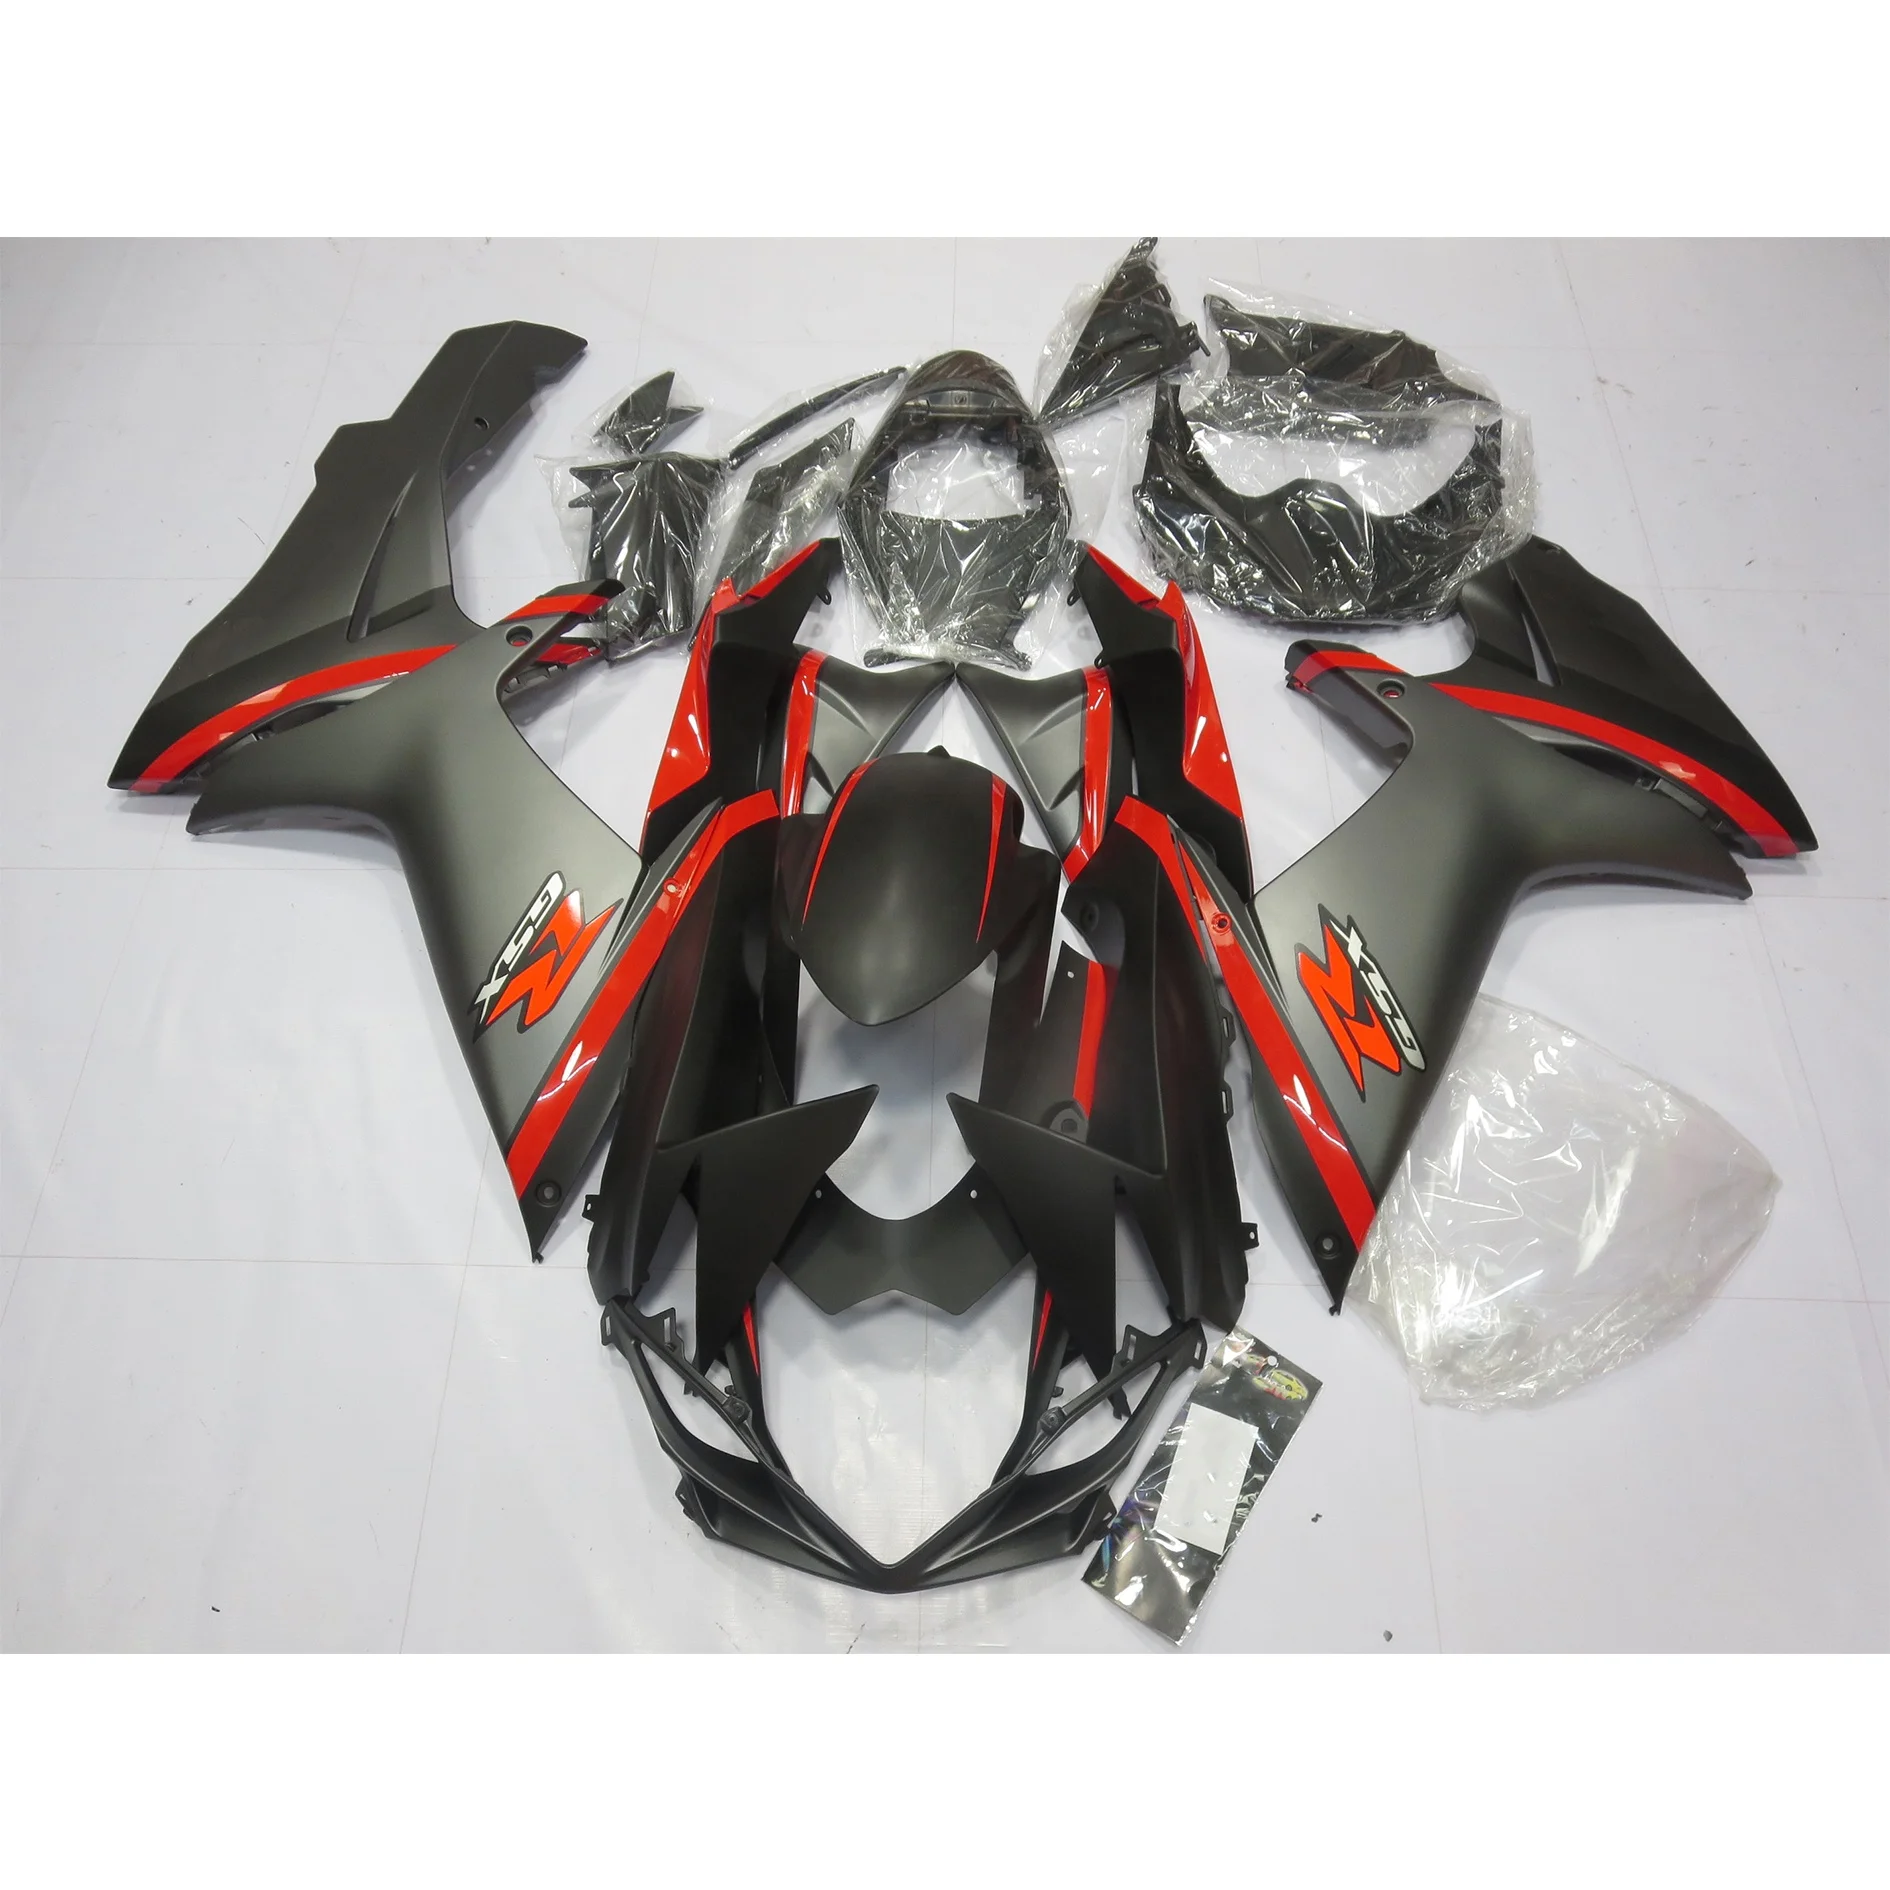 

2022 WHSC Matte Red Grey Motorcycle Accessories For SUZUKI GSXR600-750 2011-2016 K11 Motorcycle Body Systems Fairing Kits, Pictures shown